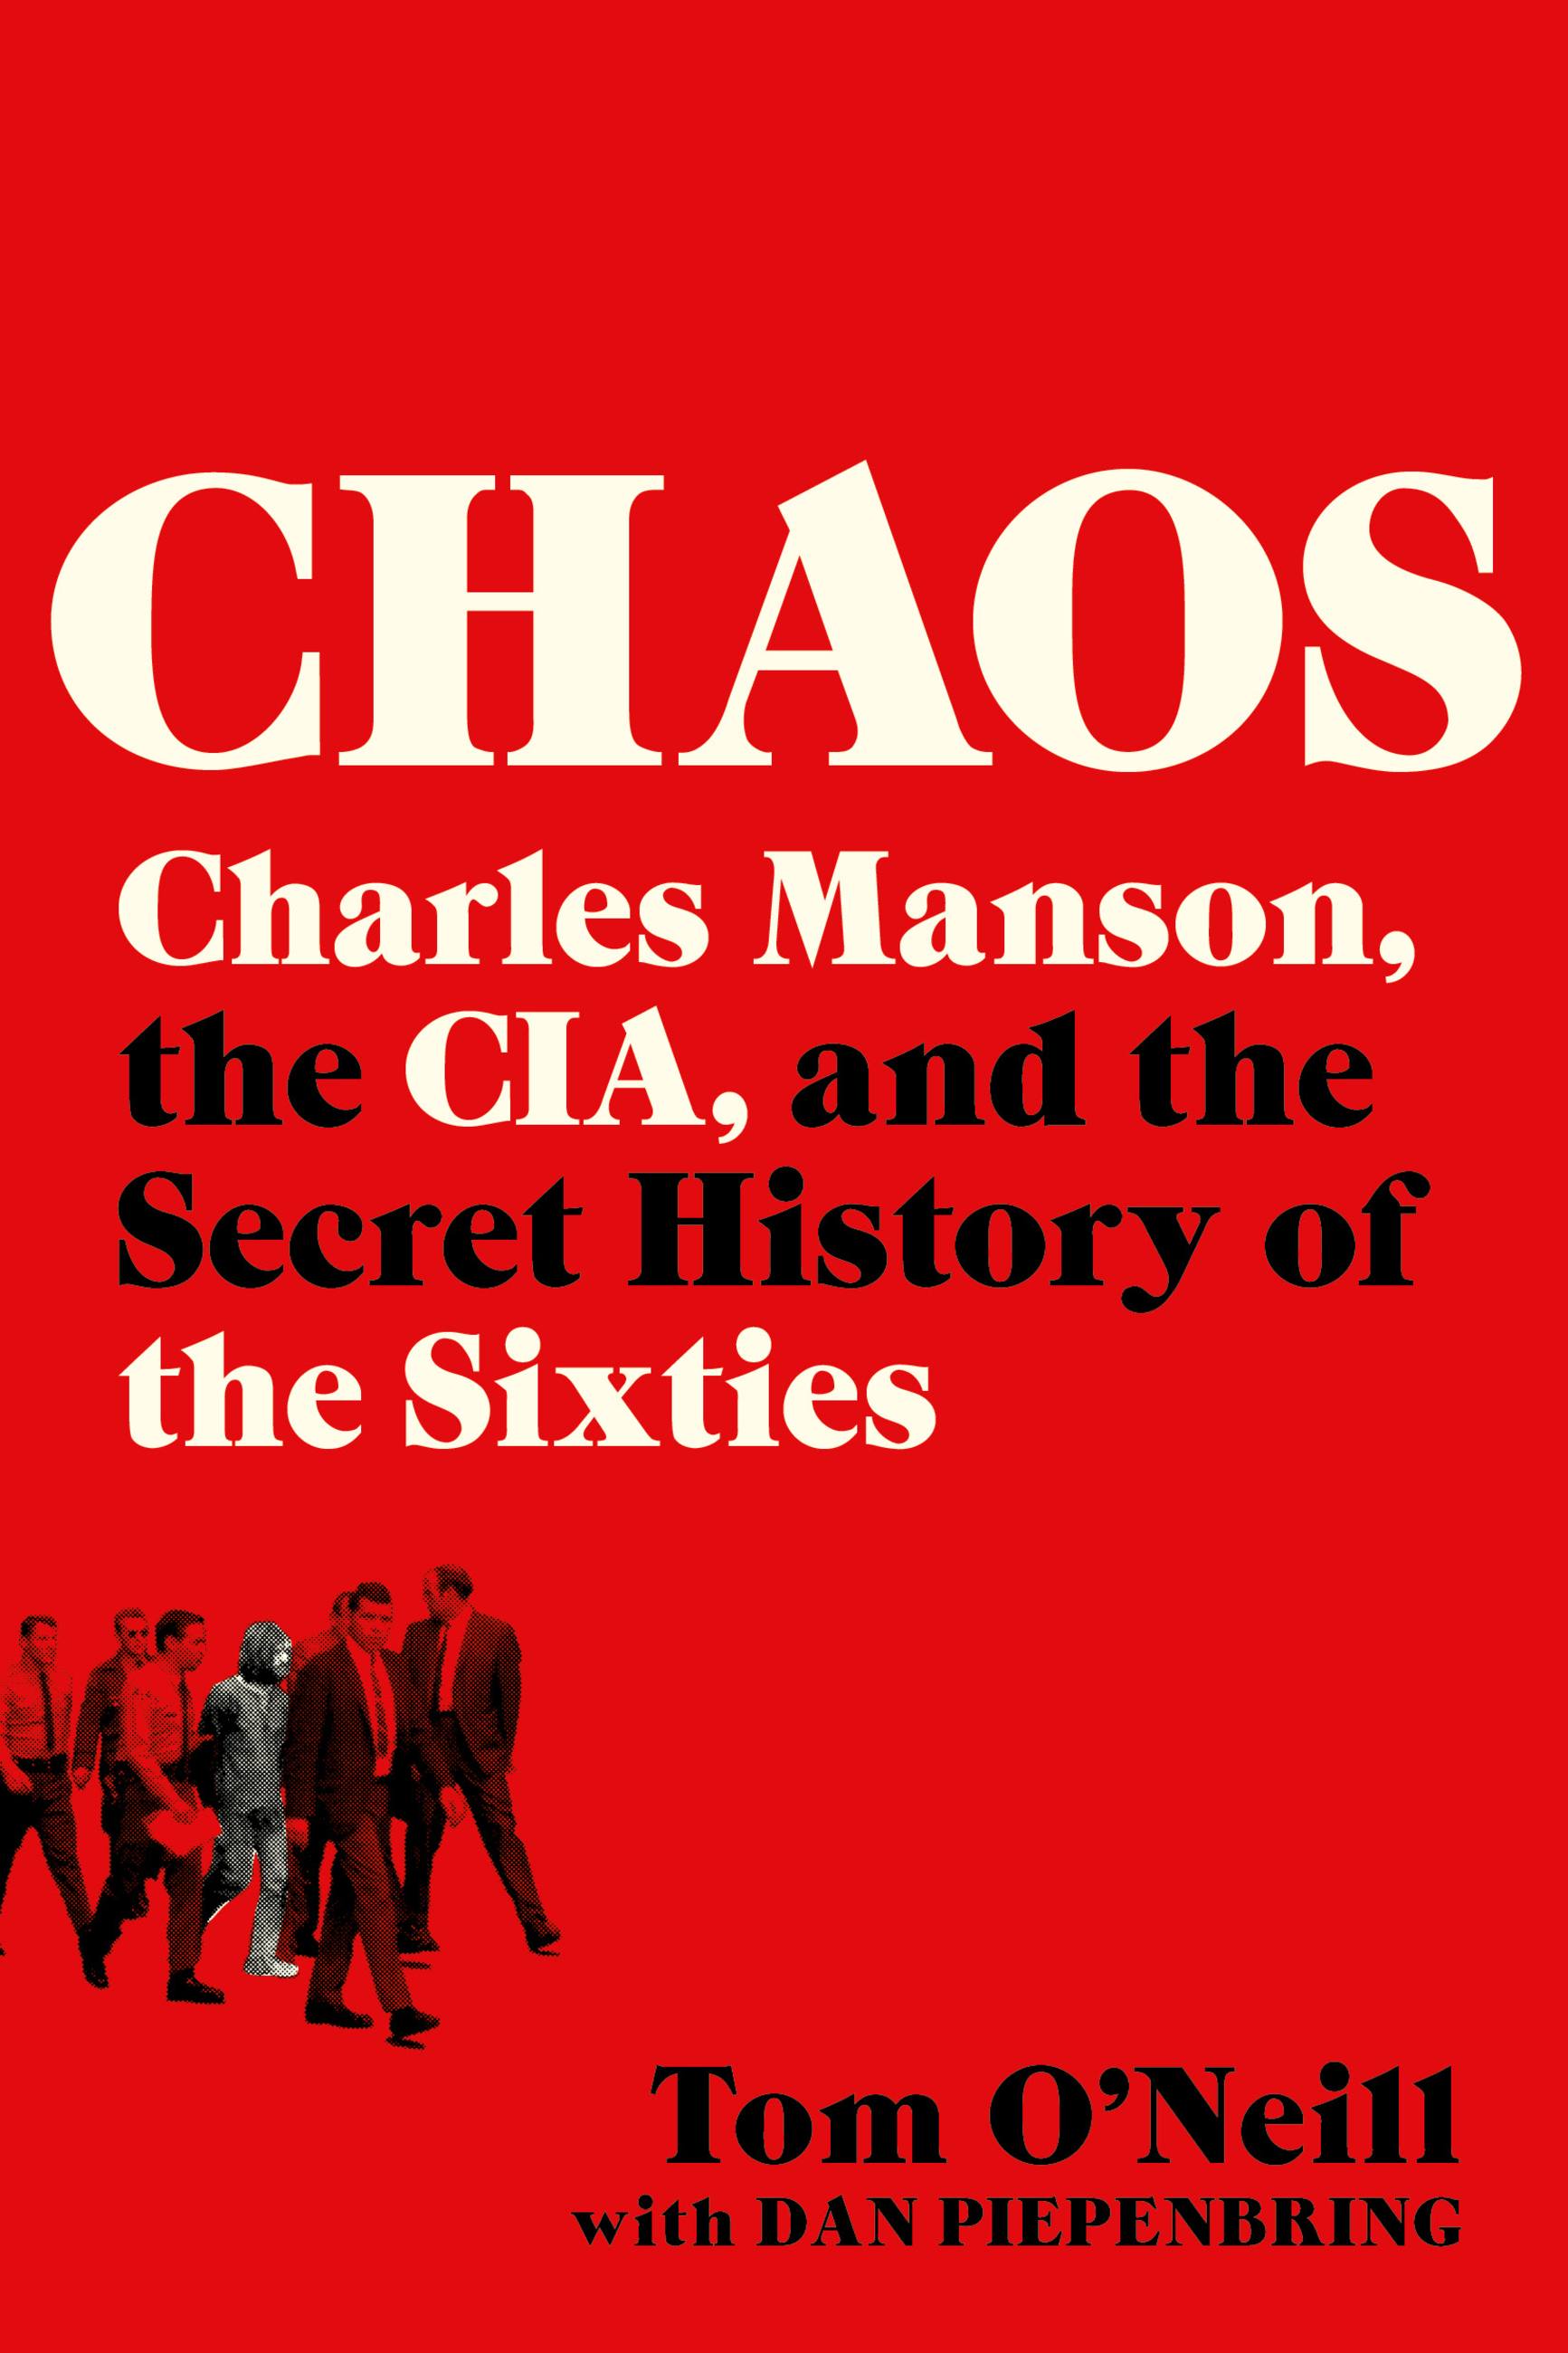 Image de couverture de Chaos [electronic resource] : Charles Manson, the CIA, and the Secret History of the Sixties